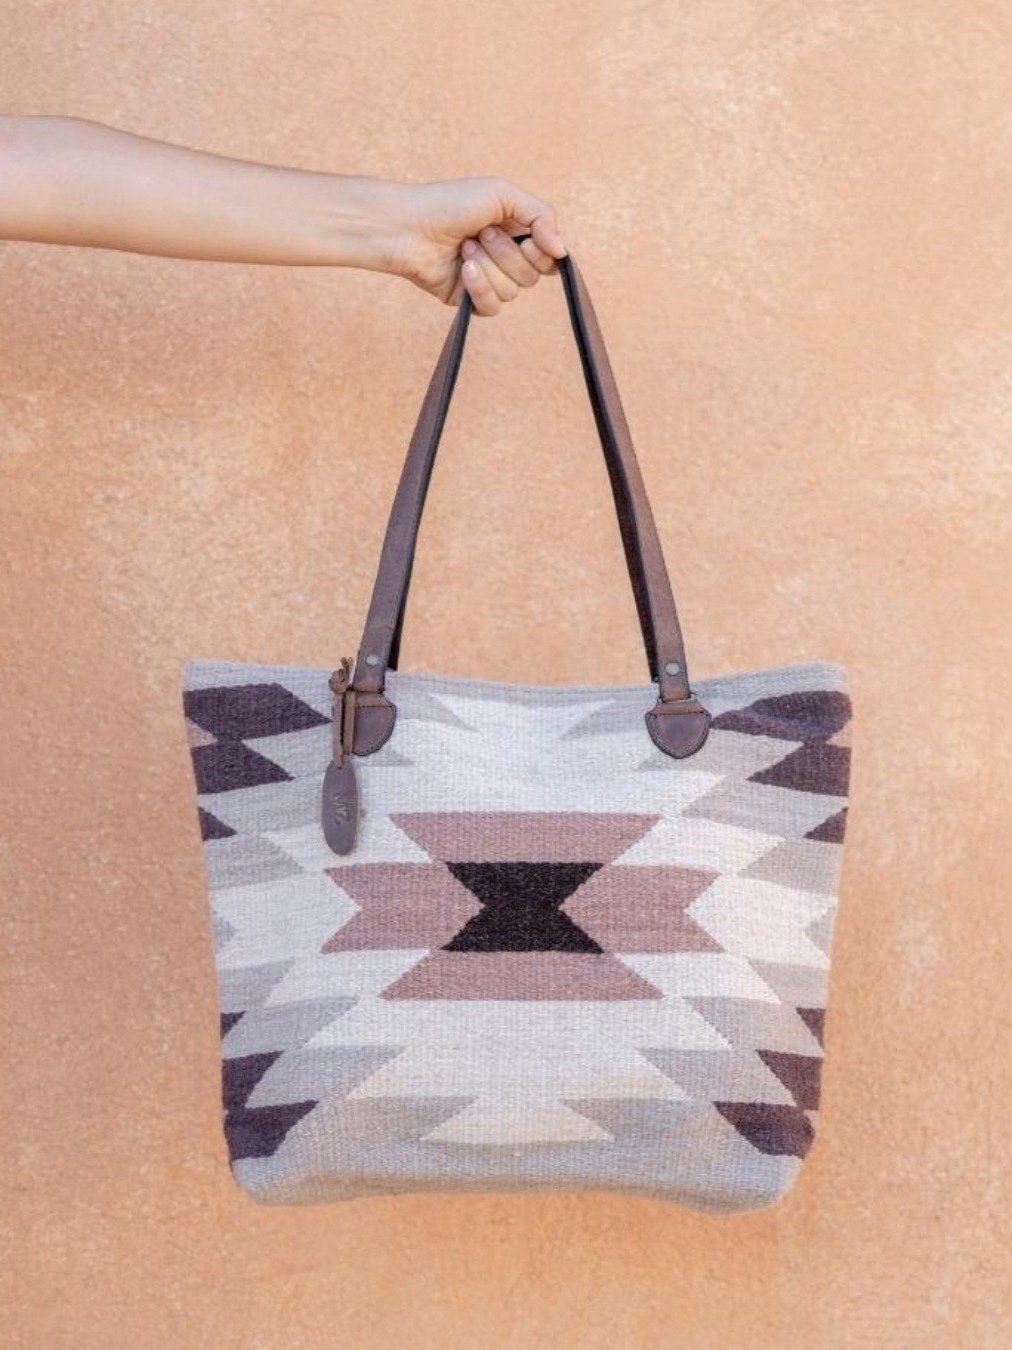 12 Sustainable & Eco-Friendly Handbag Brands To Carry in 2023